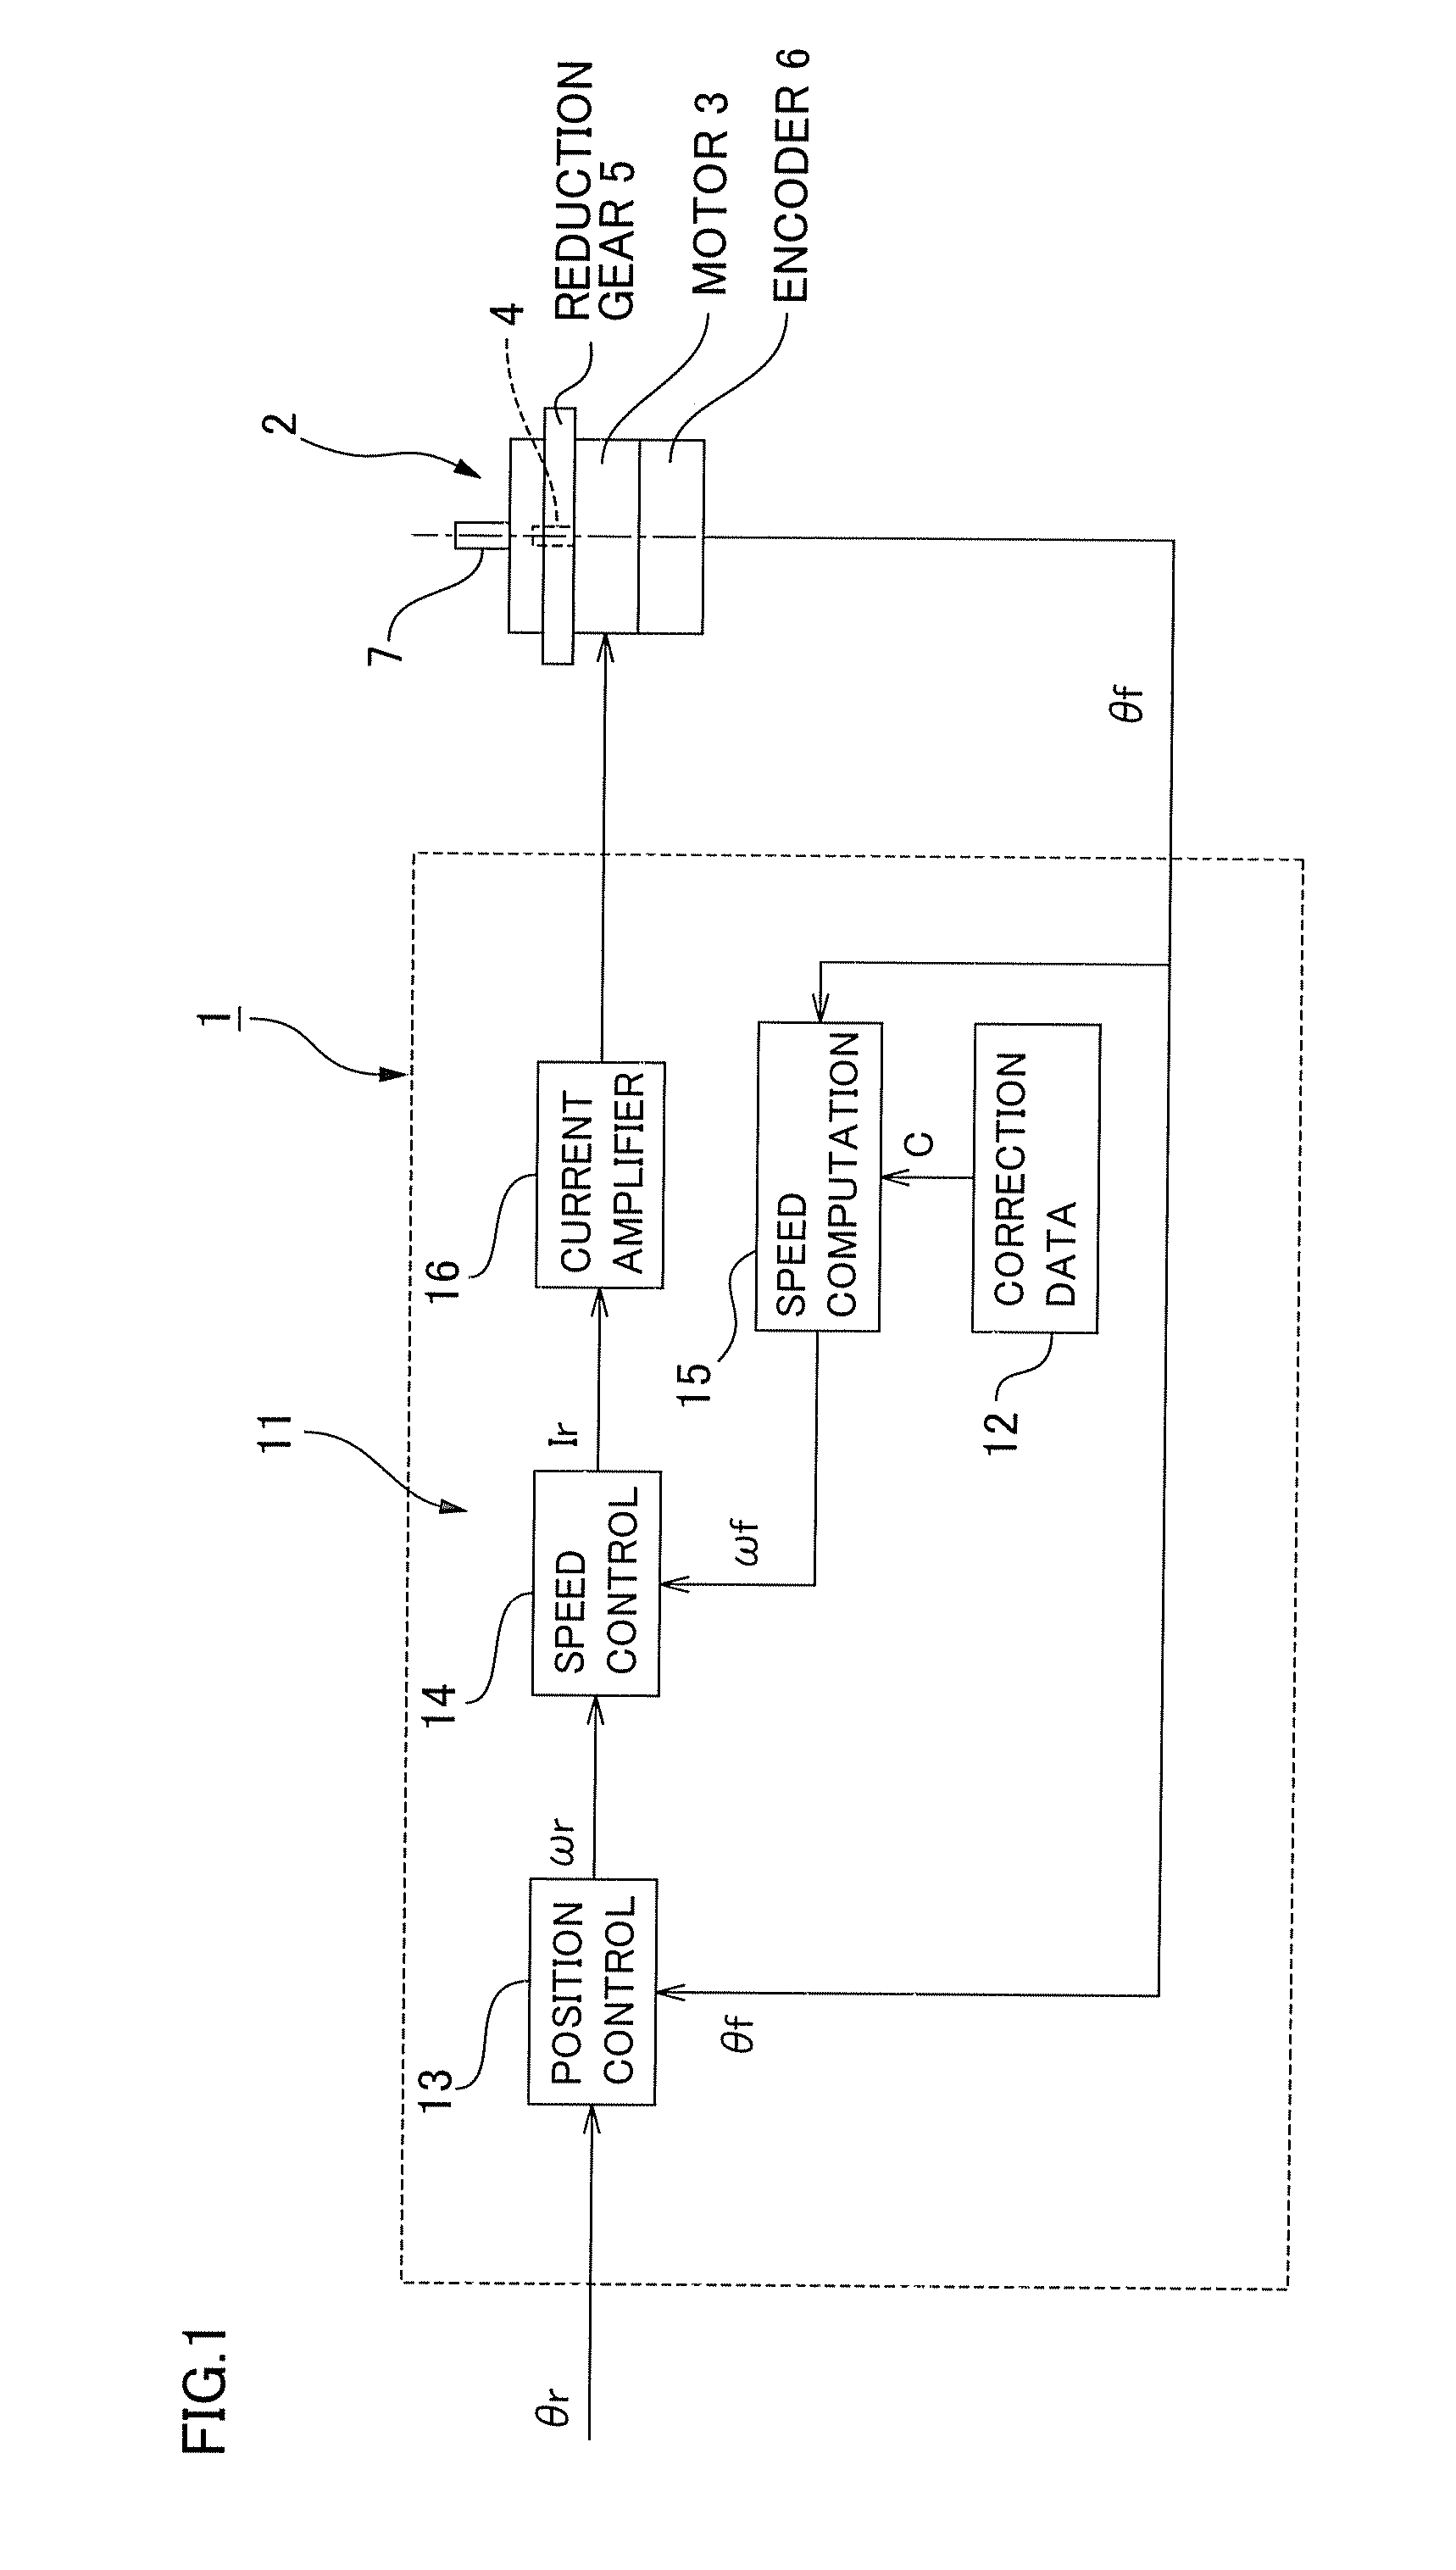 Method for suppressing variation in speed of actuator